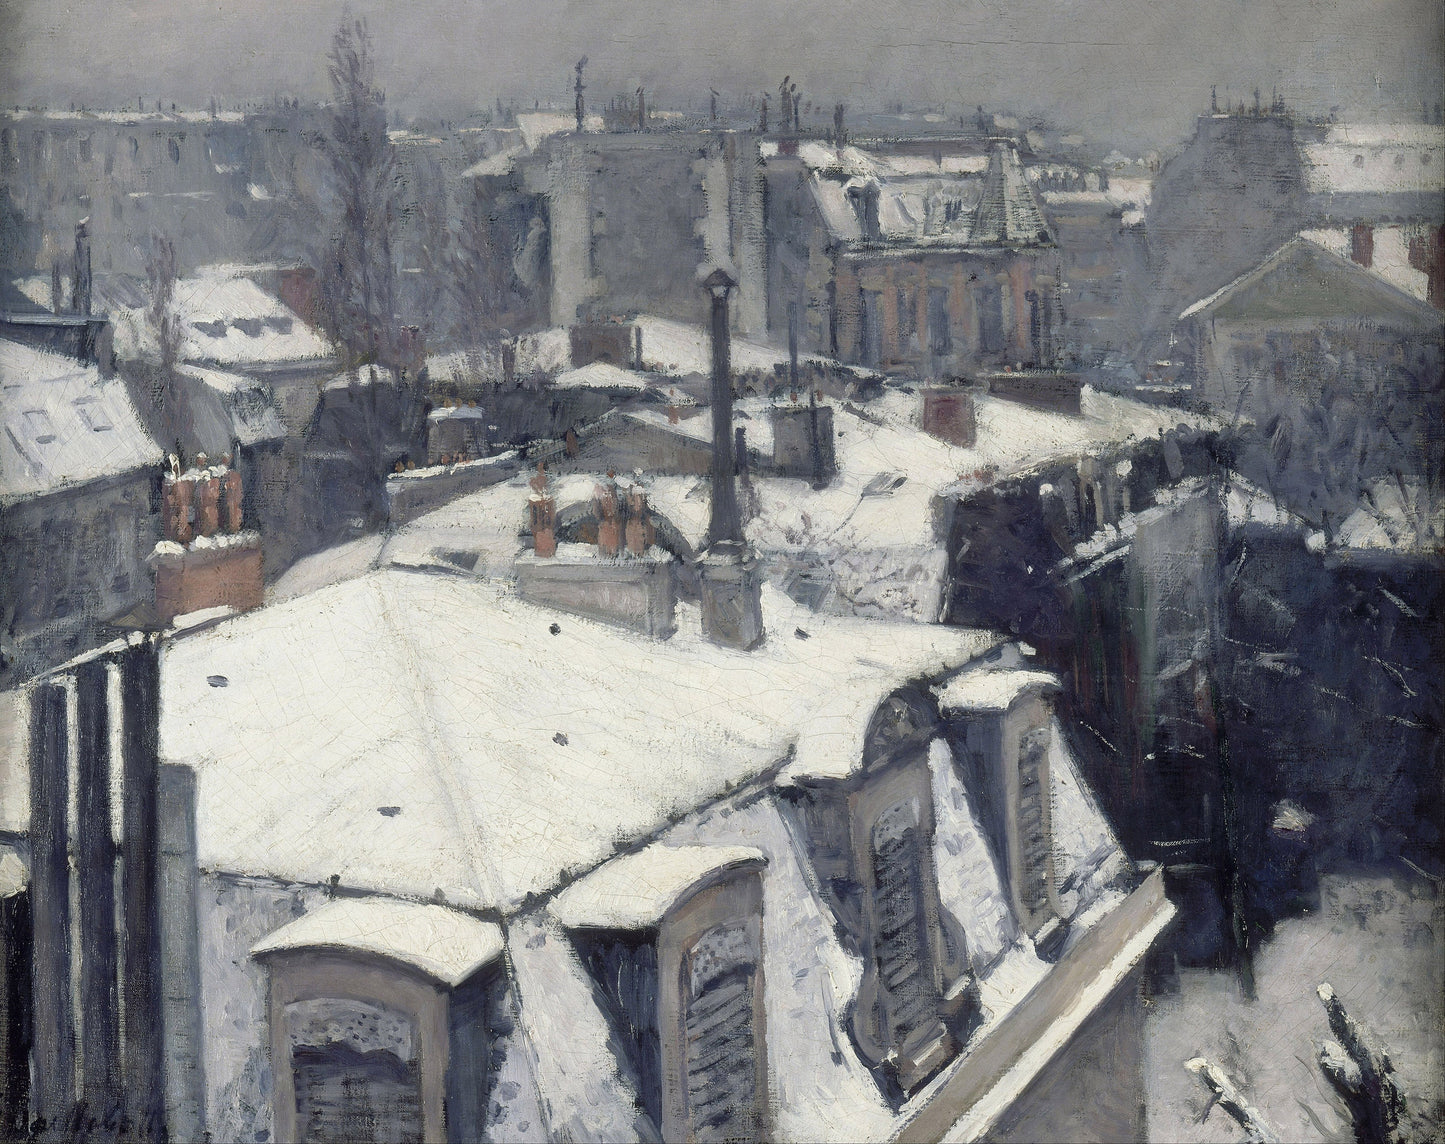 Gustave Caillebotte Impressionist Paintings Set 2 [16 Images]